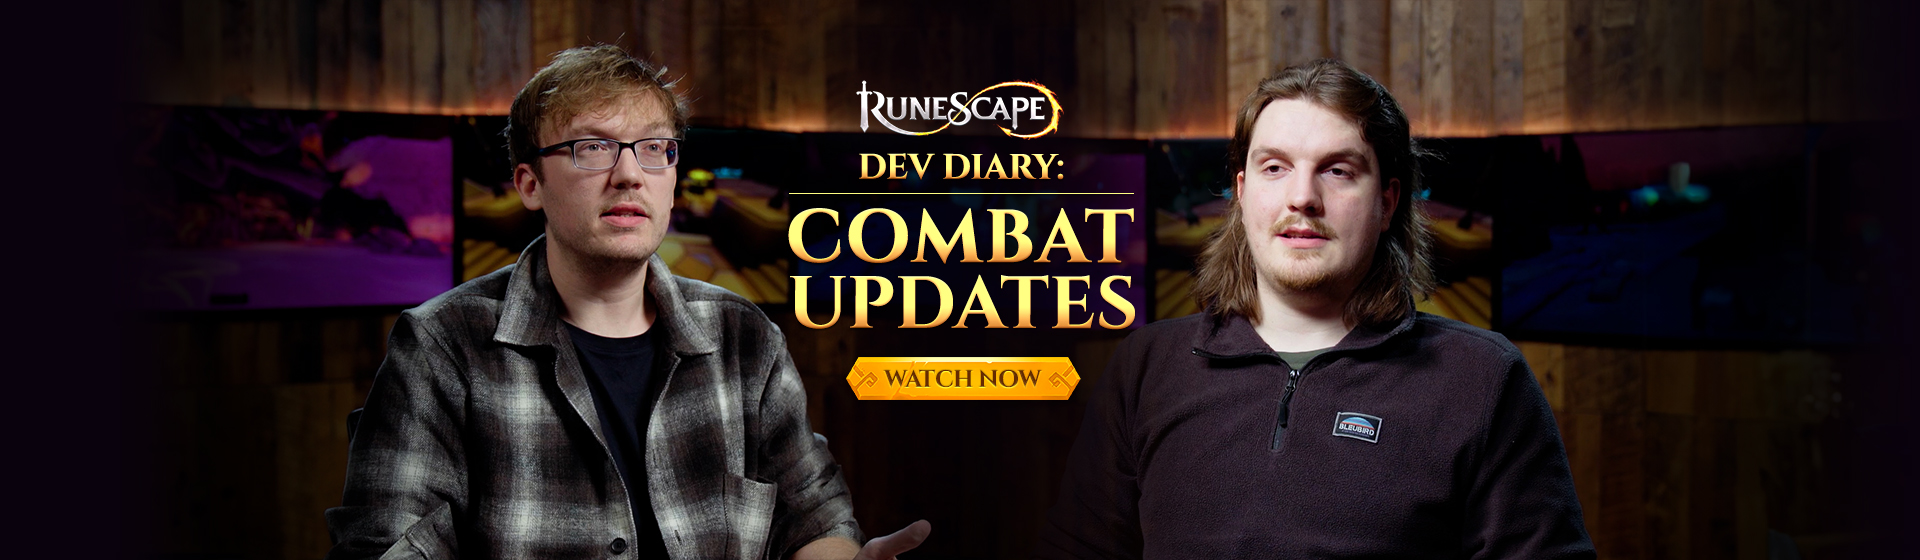 Old School Runescape - Exclusively join the OSRS team to watch the finale  of the Deadman Spring Invitational live from ESL Studio One.  http://services.runescape.com/m=news/deadman-spring-invitational-tickets?oldschool=1  Limited tickets available now ...